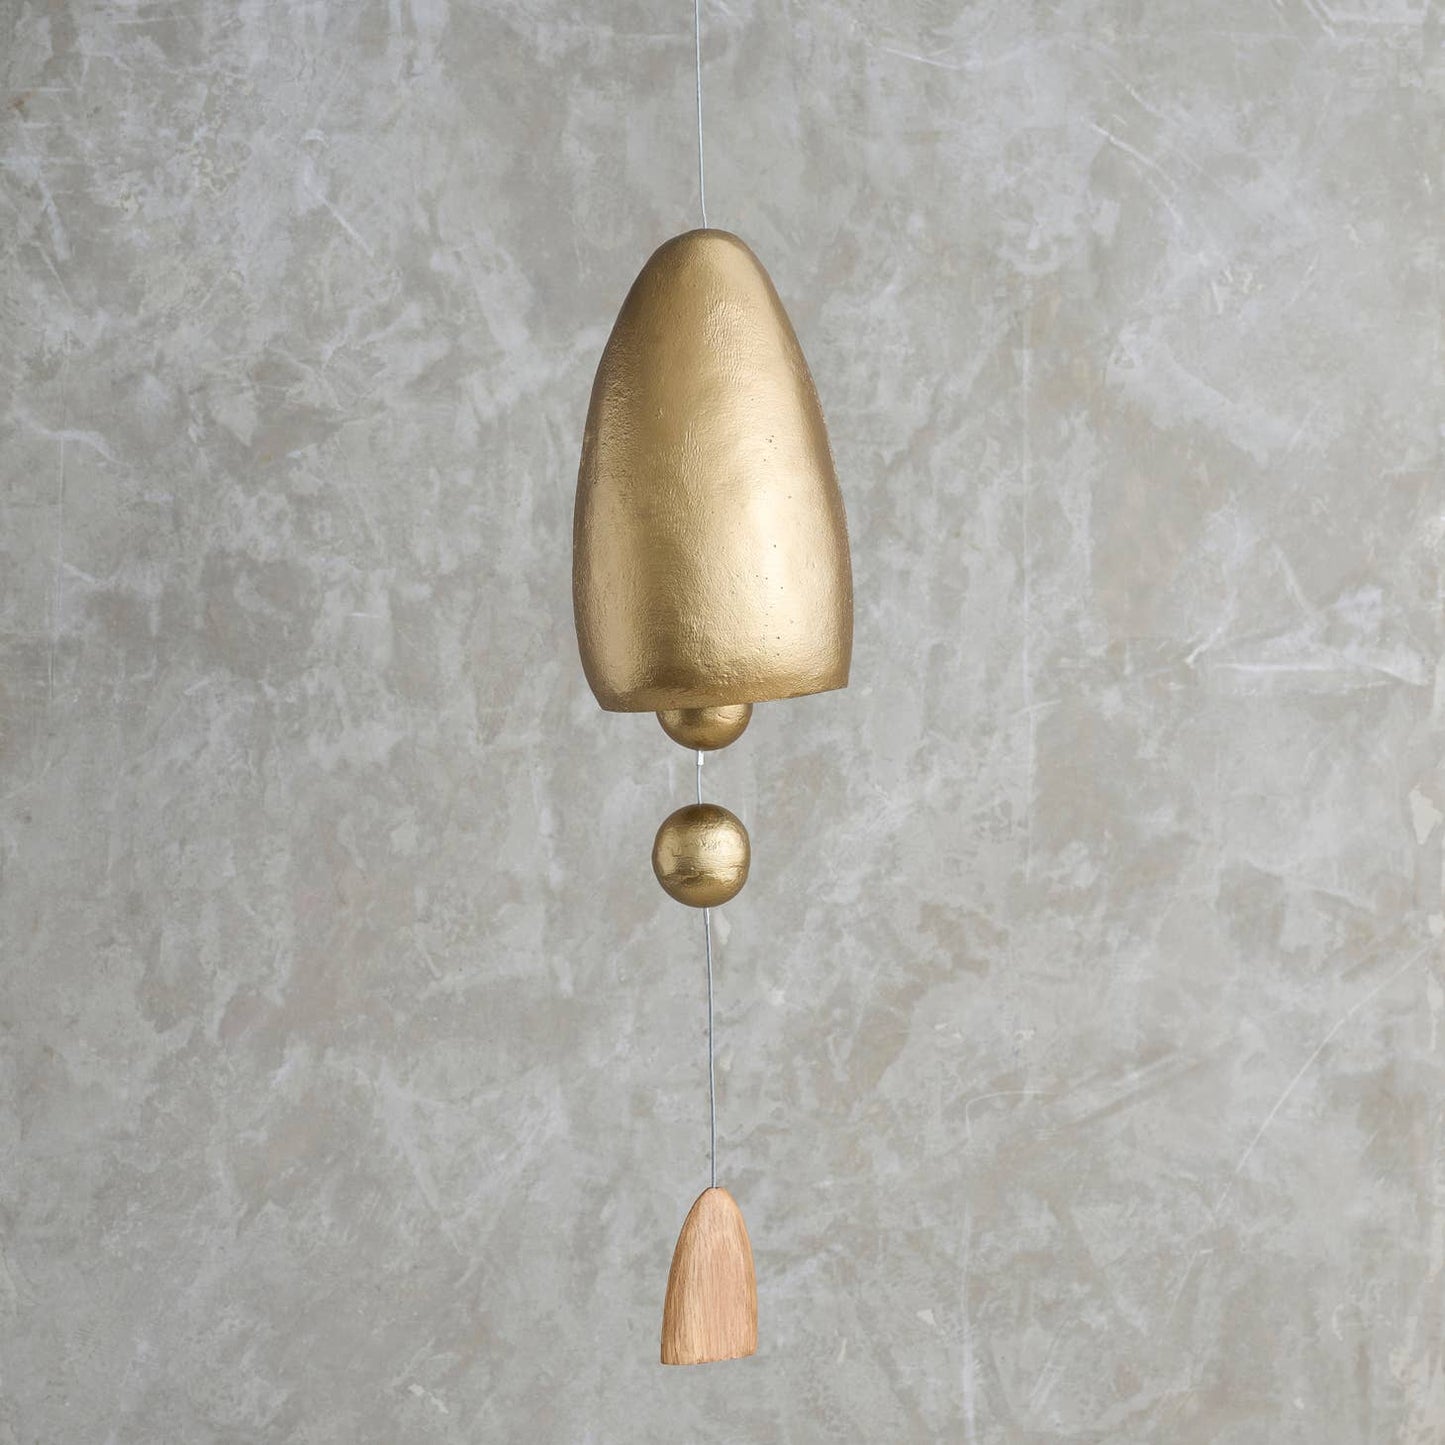 This tall, cone-shaped bell is sand-cast in aluminum and given an antique brass finish, then outfitted with a pair of hollow metal spheres and a dome-shaped, polished oak sail on its center cord. Ethically made in India.